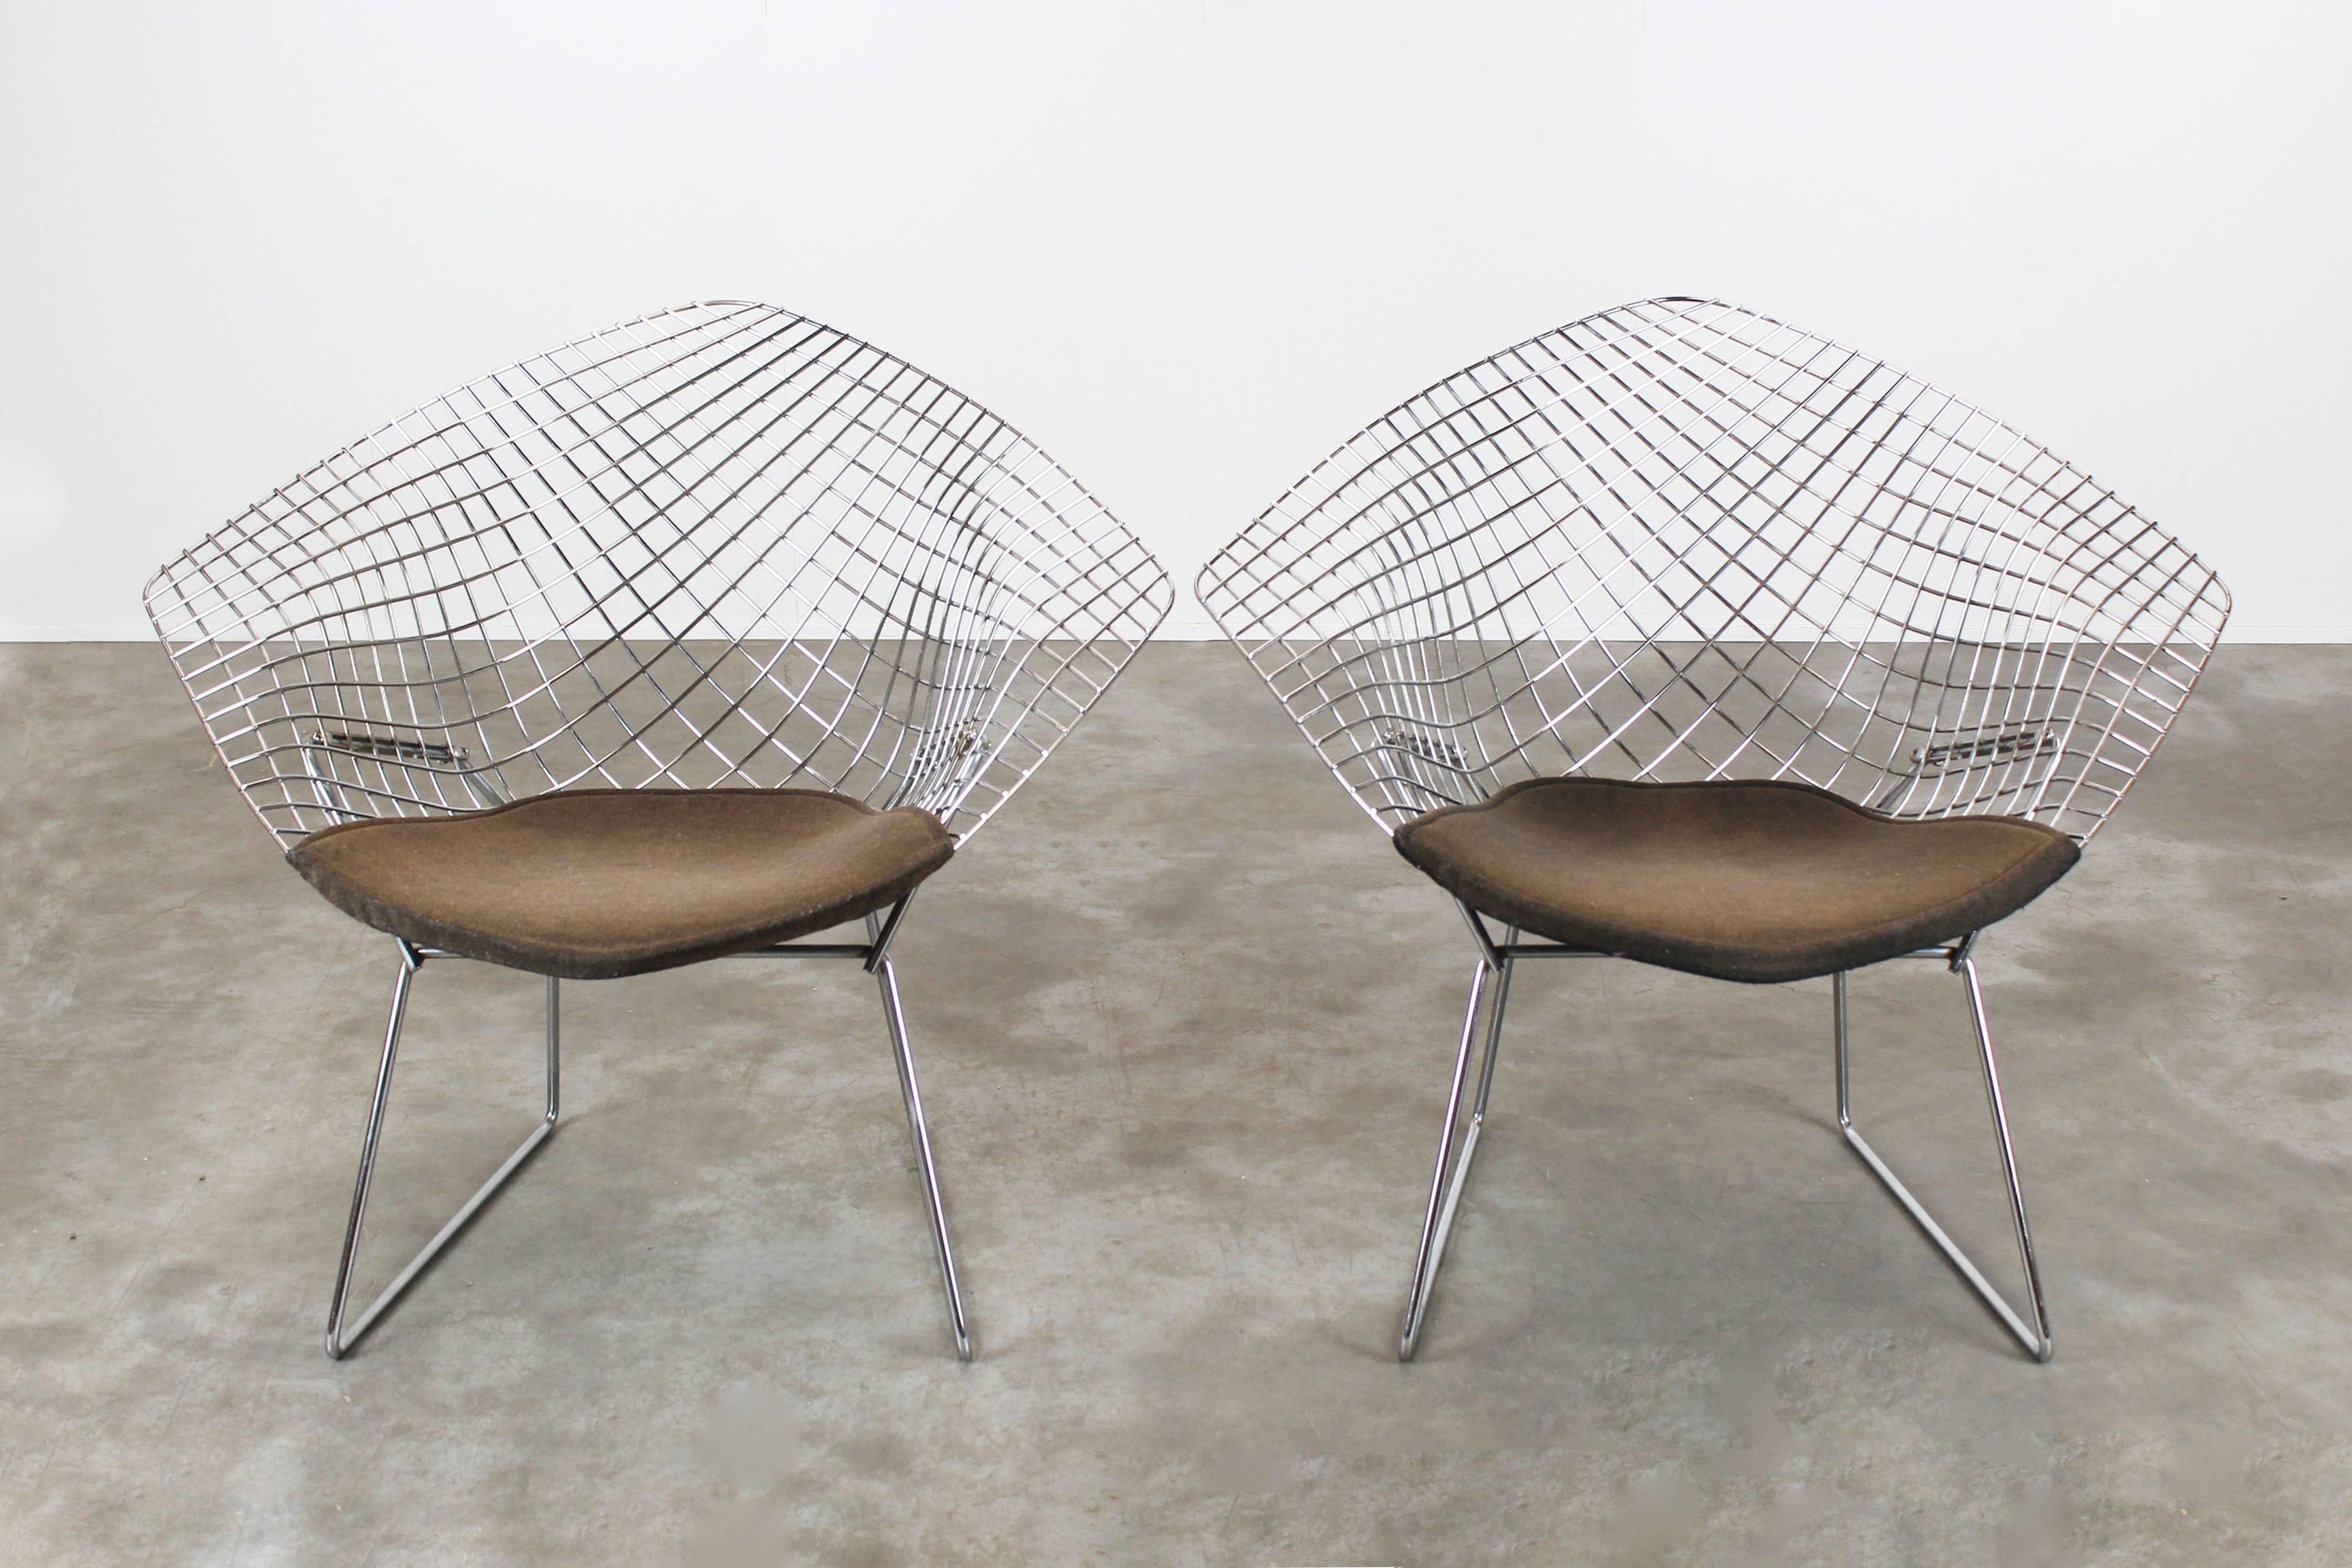 Set of Two Chrome Diamond Chairs by Harry Bertoia for Knoll, 1970, Grey 1